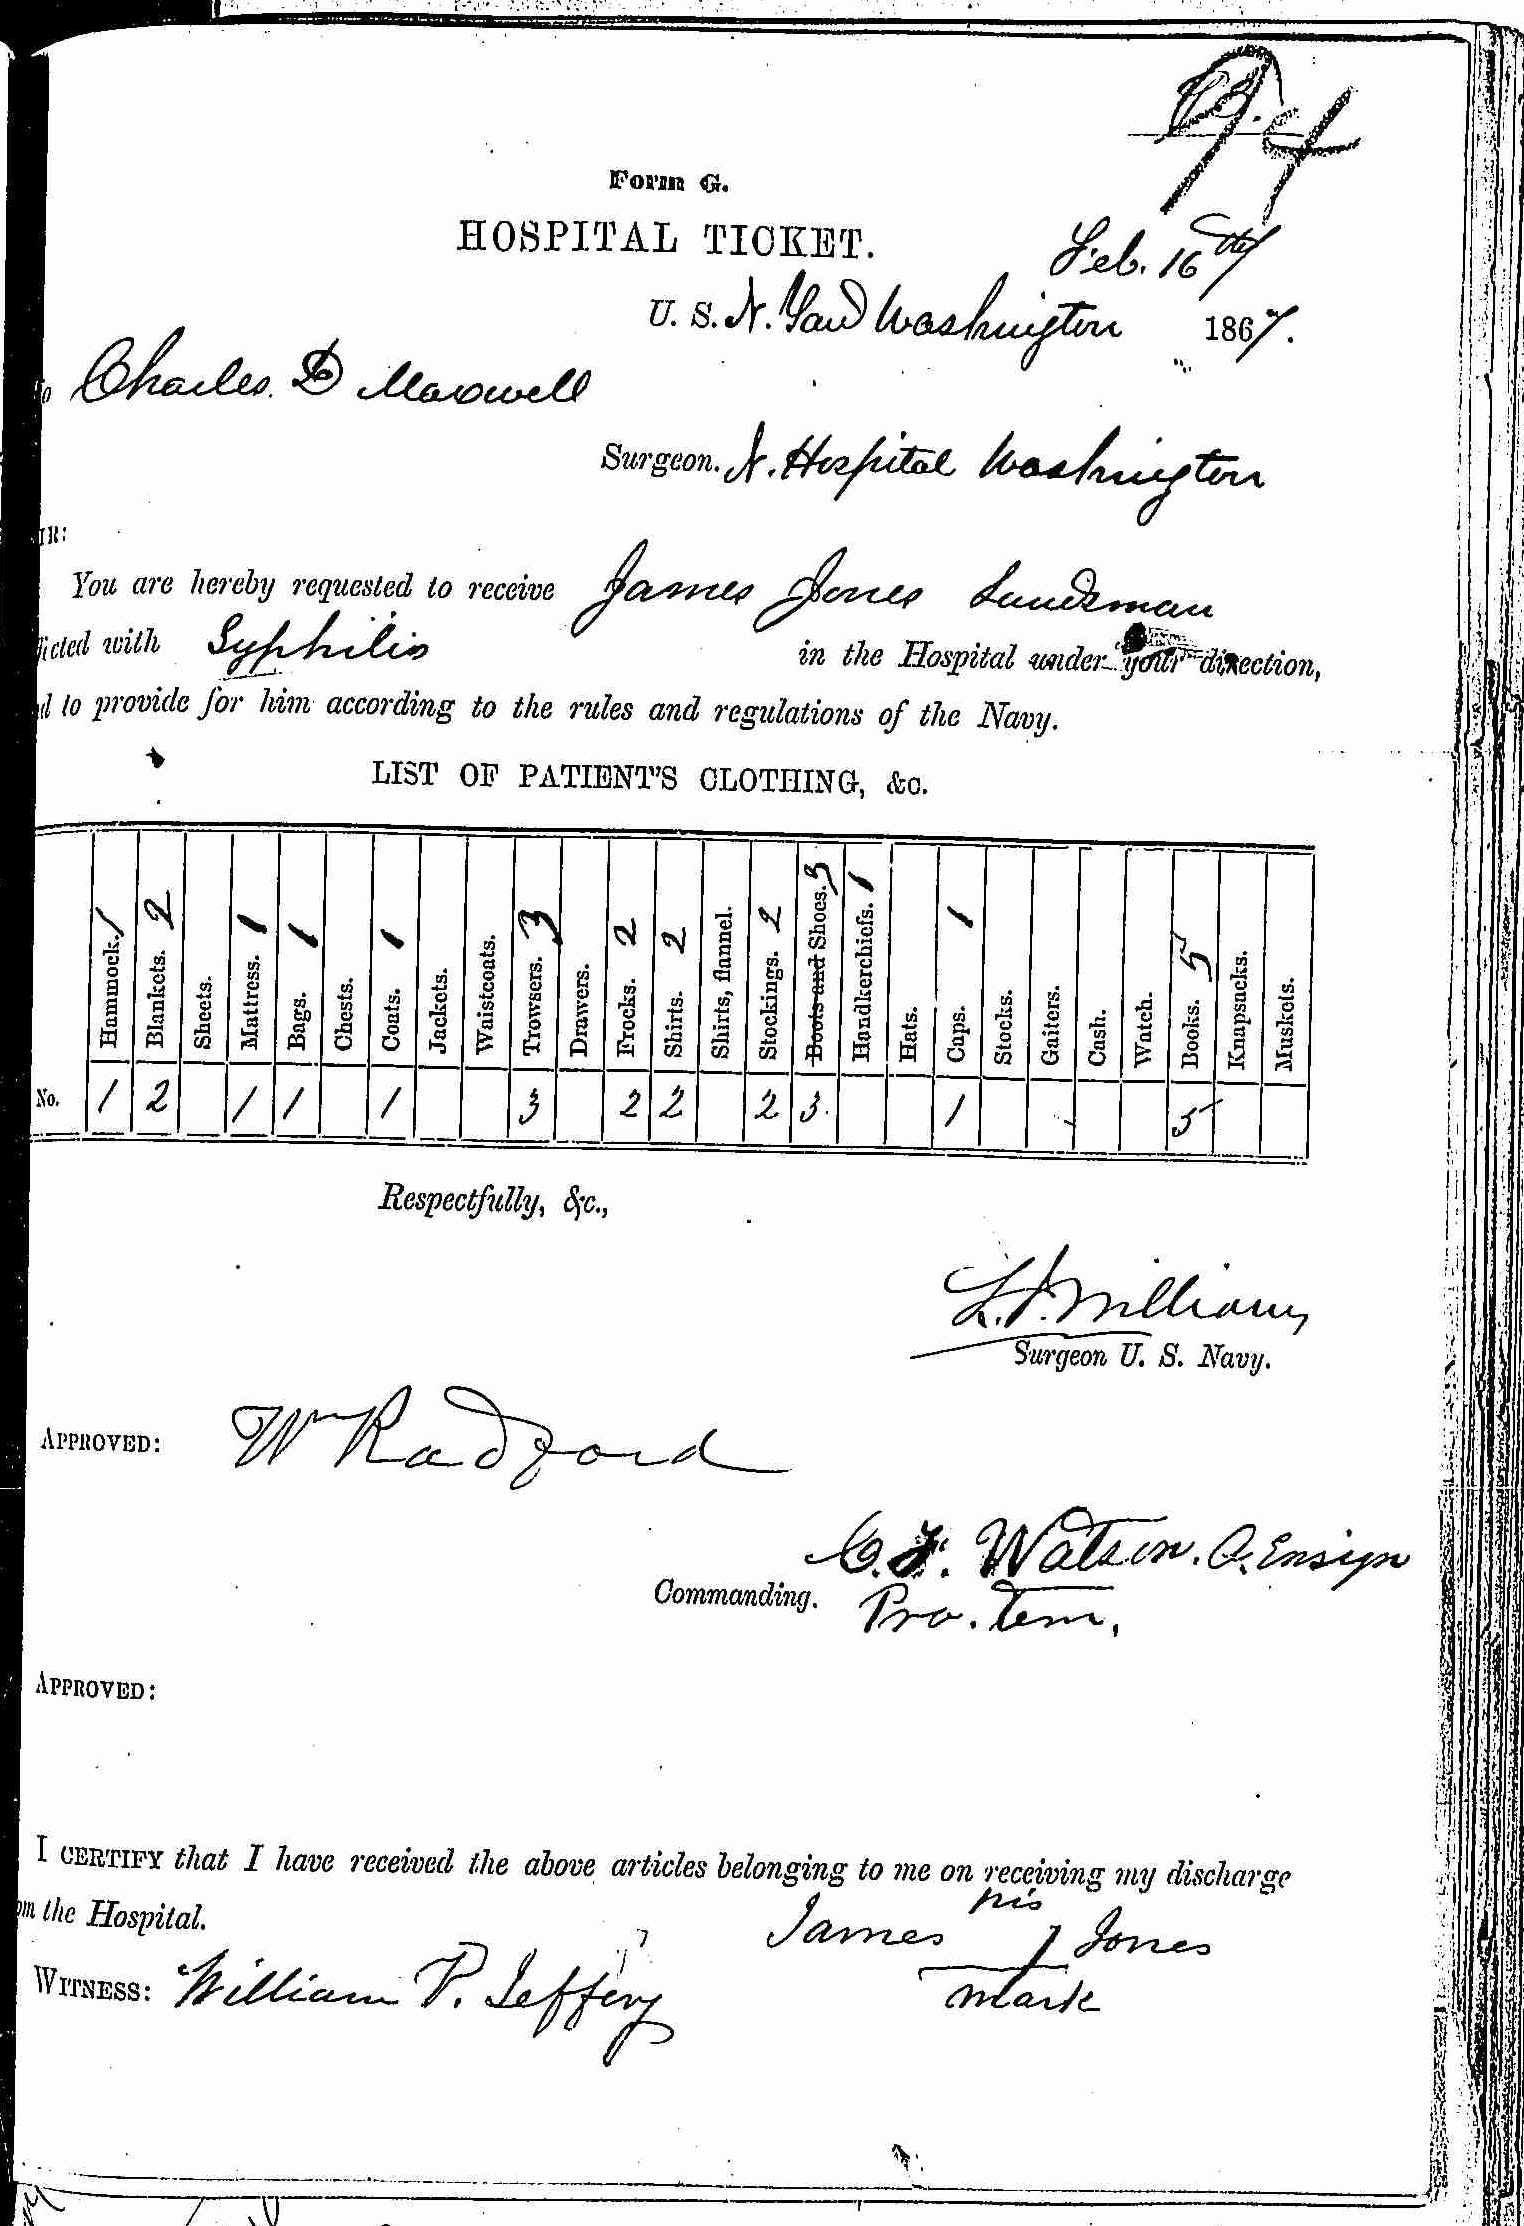 Entry for James Jones (page 1 of 2) in the log Hospital Tickets and Case Papers - Naval Hospital - Washington, D.C. - 1865-68